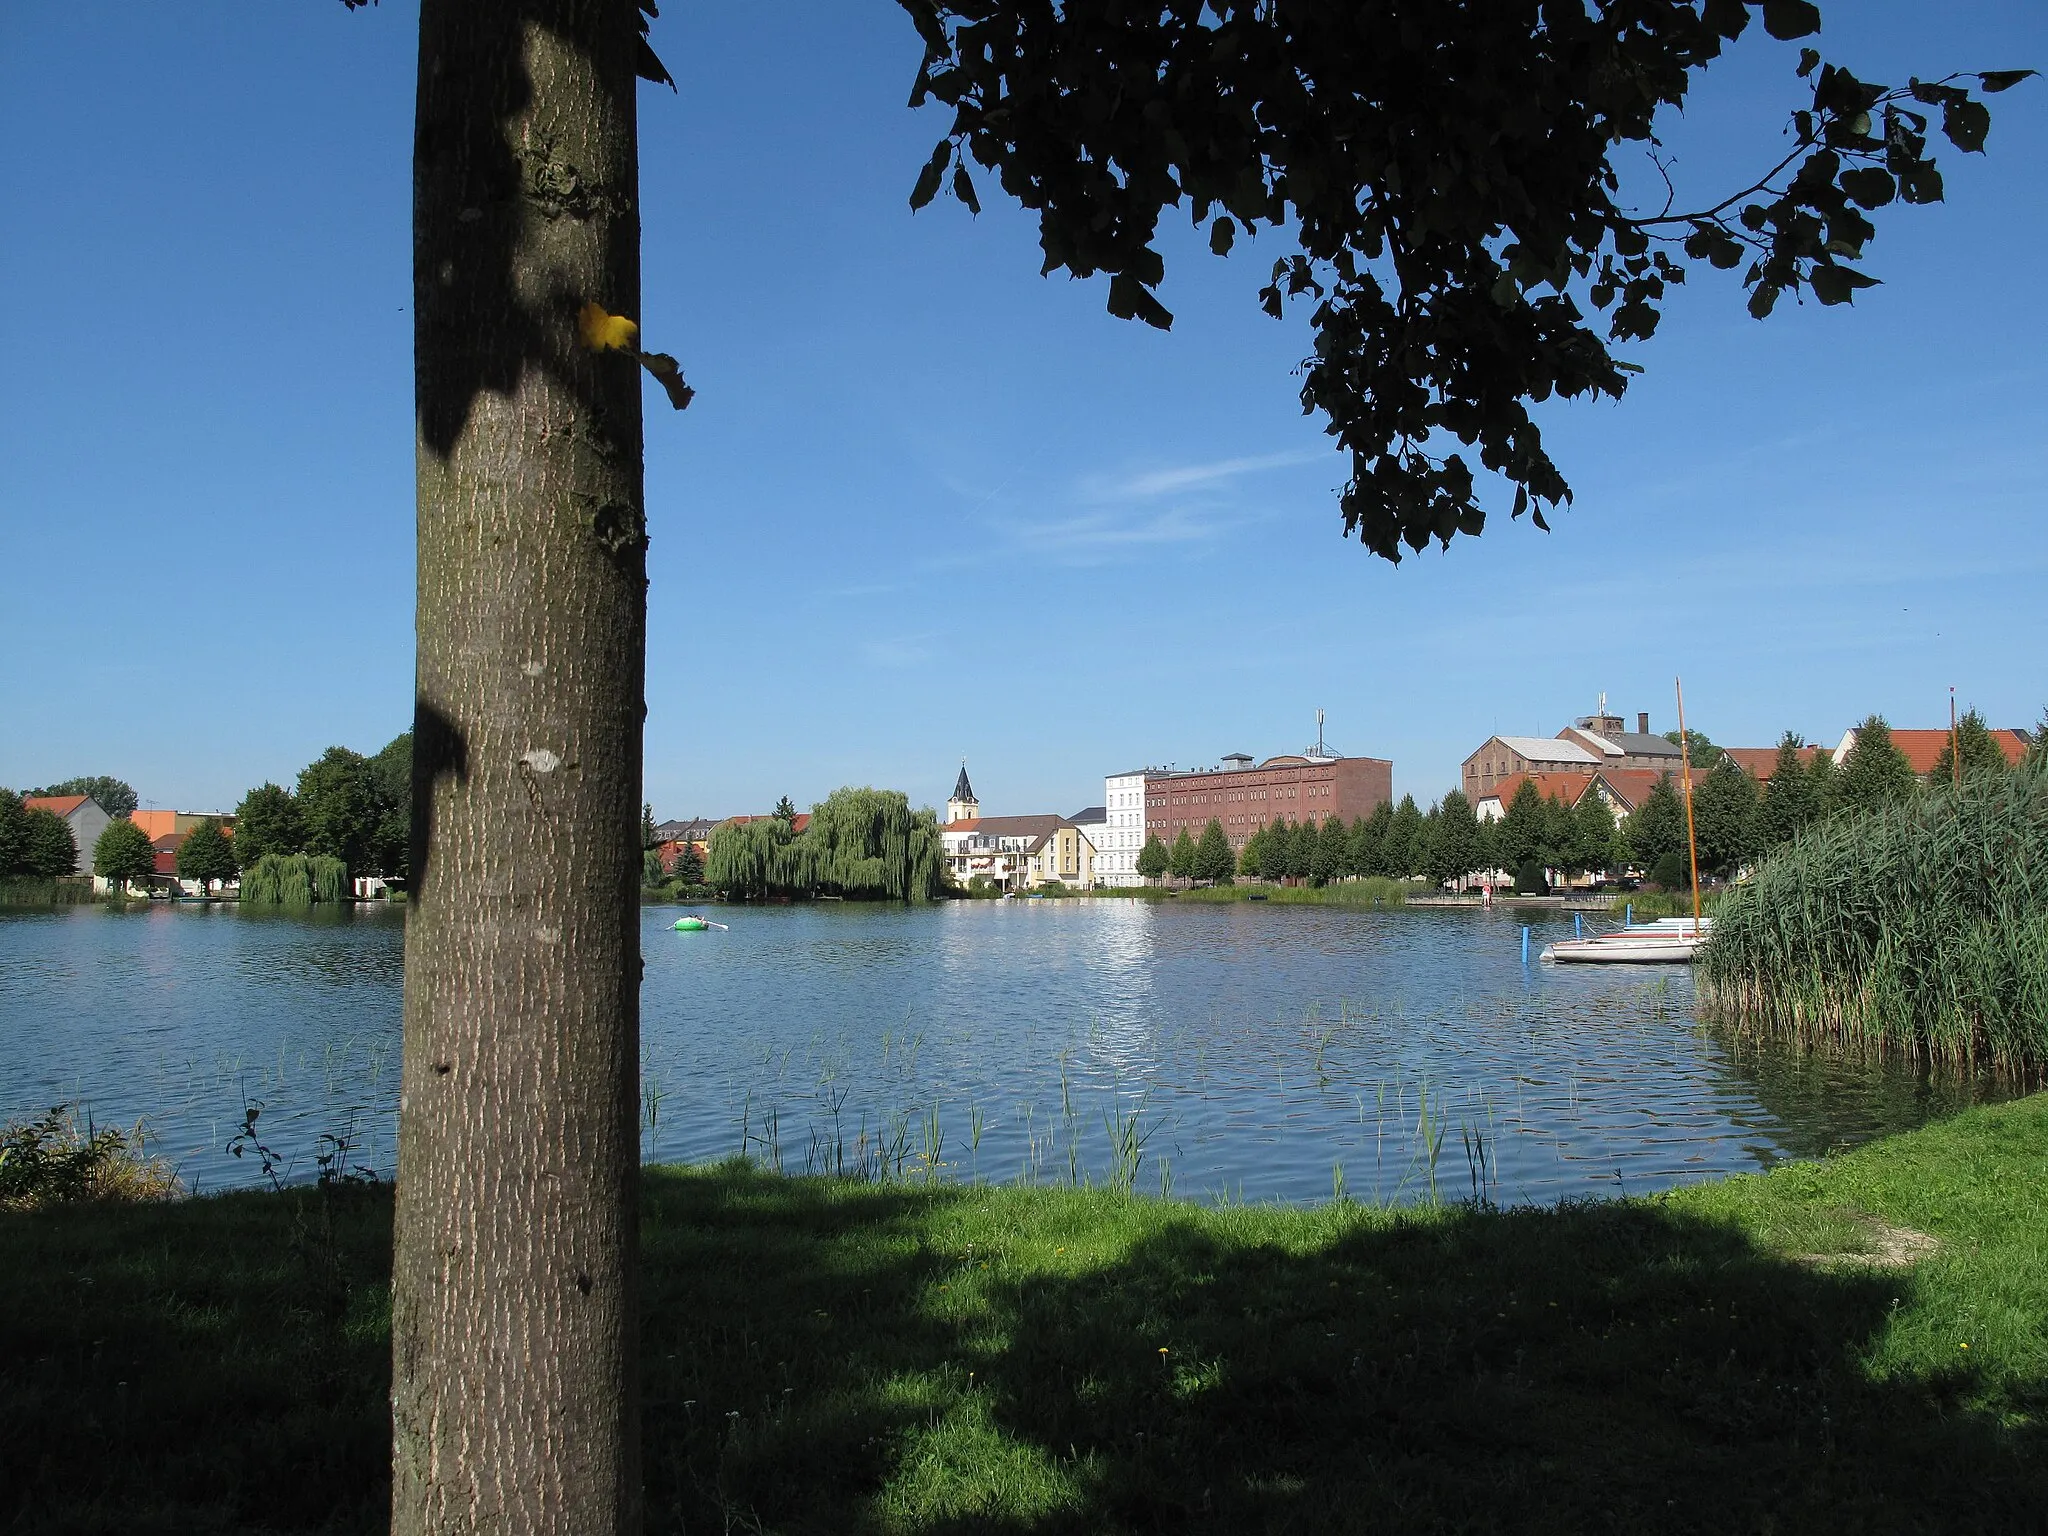 Photo showing: View from the eastern bank of the Großer Müllroser See to Müllrose. The lake is situated between the town Müllrose in the north and the municipality Mixdorf in the south in the District Oder-Spree, Brandenburg, Germany. The lake covers 1,32 km² and is a part of the Schlaube Valley Nature Park.